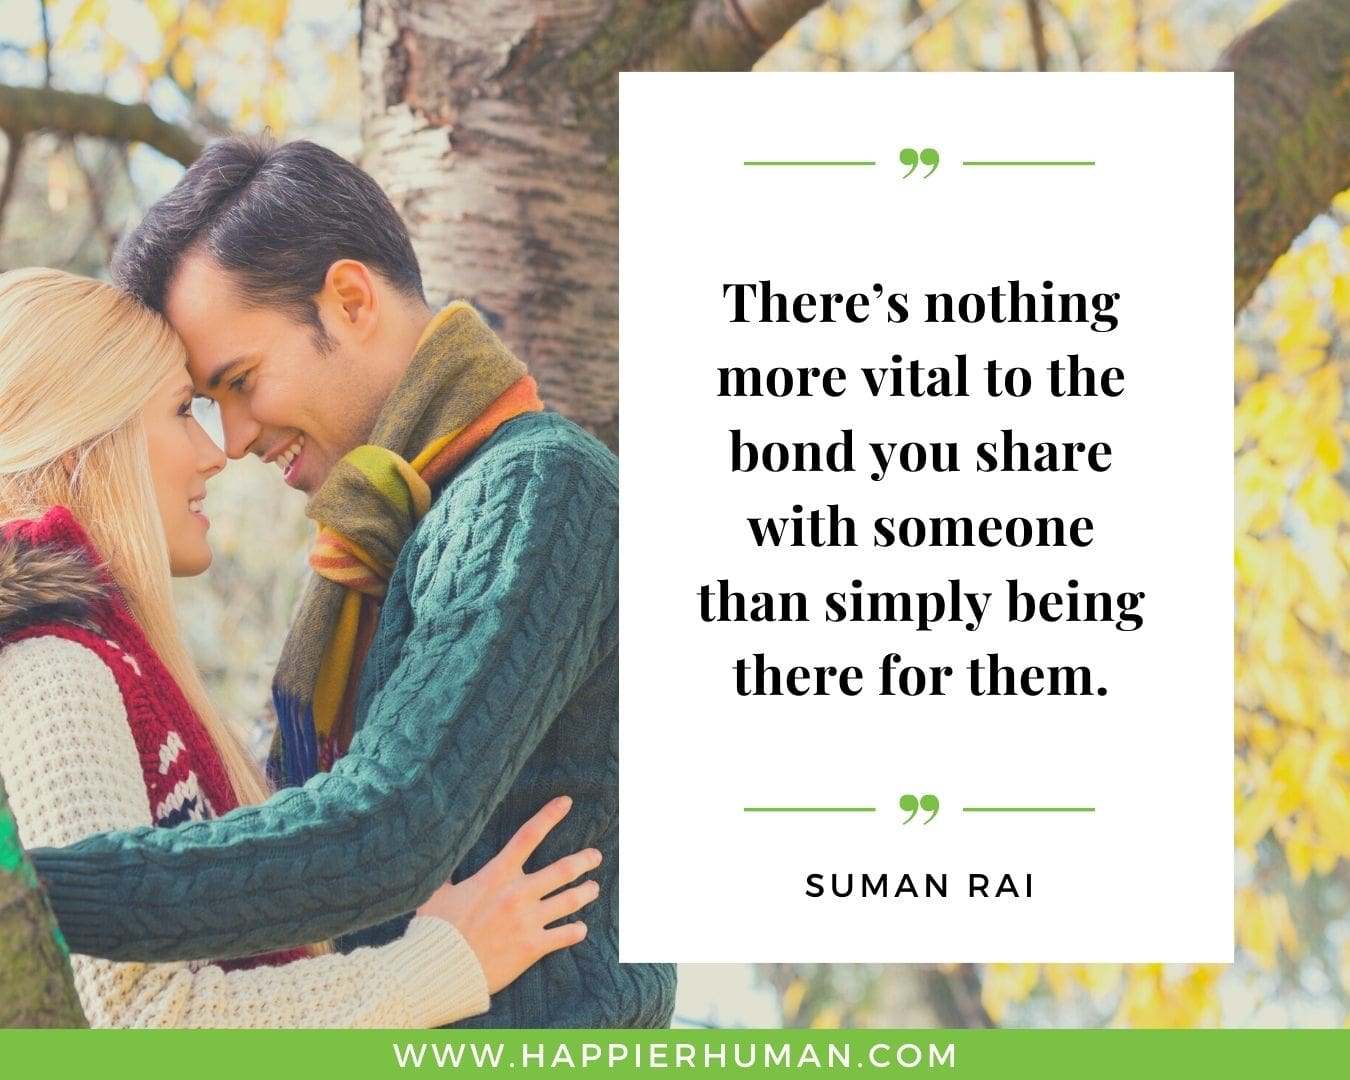 I’m Here for You Quotes - “There’s nothing more vital to the bond you share with someone than simply being there for them.” – Suman Rai